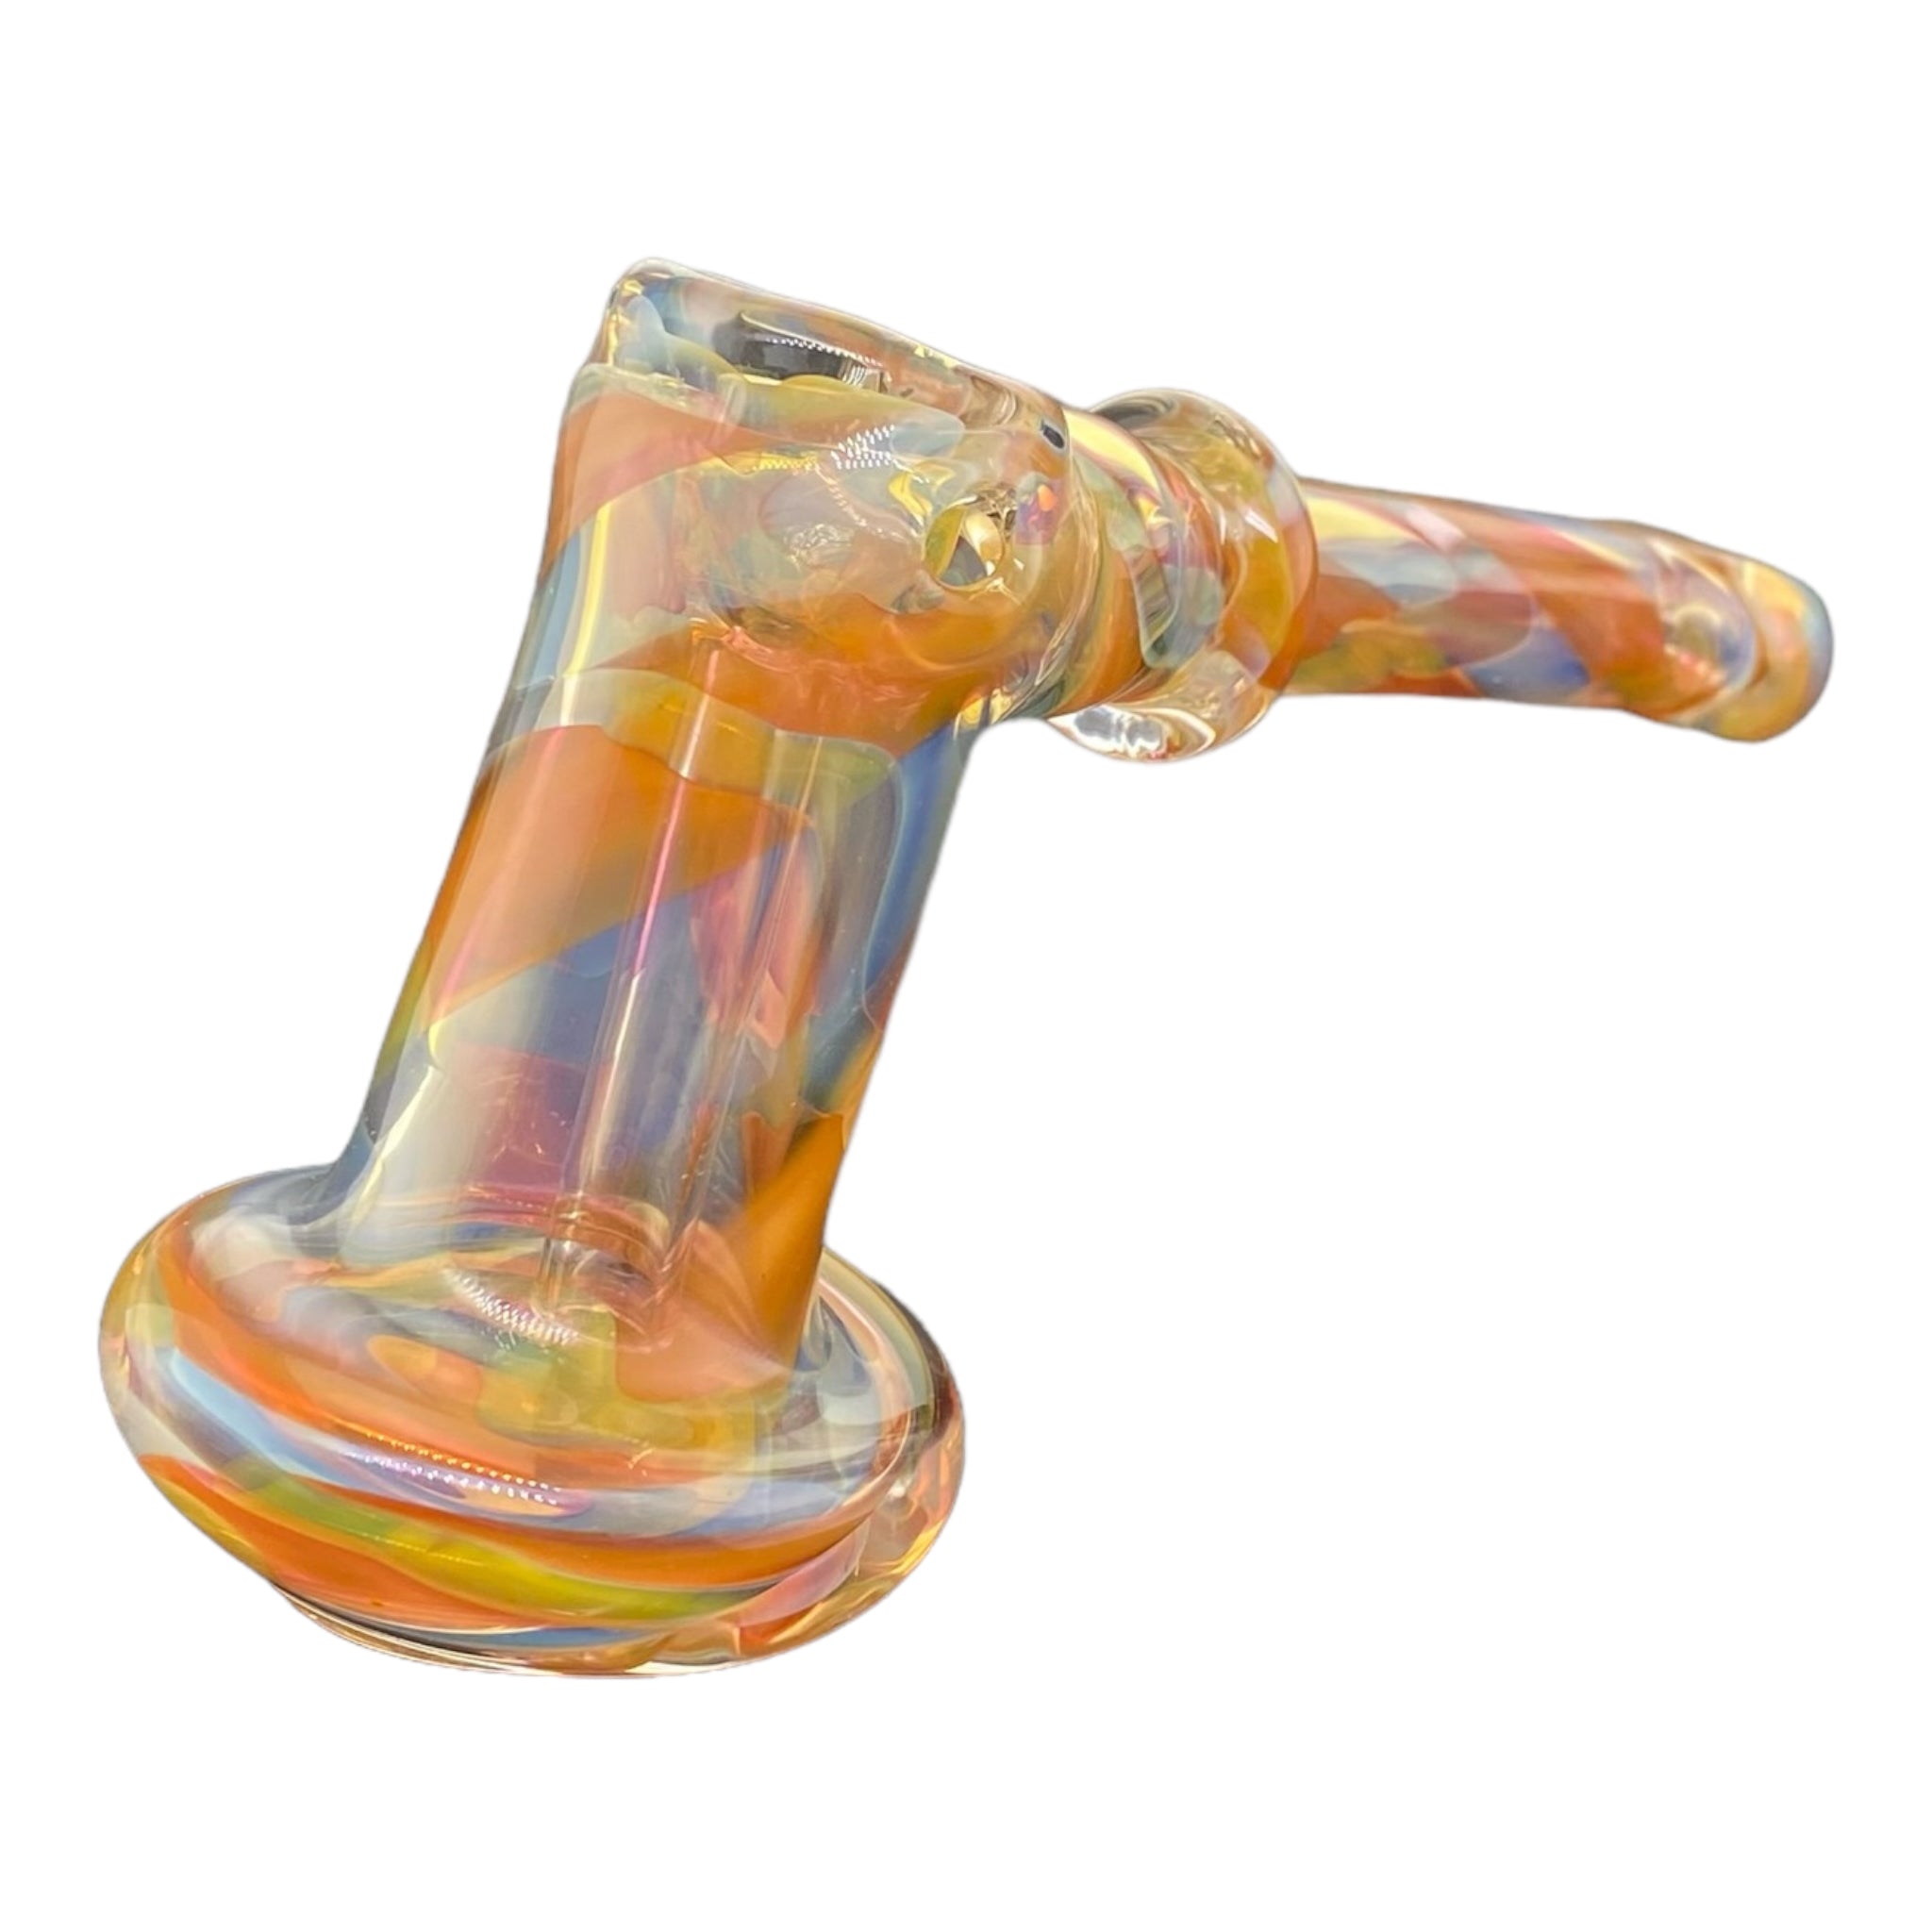 Glass Pipe - Hammer, Gold And Silver Fuming, 5.0 • American Made Glass  Pipes, Spoons, Bubblers, Bongs, Bats, Dab Straws